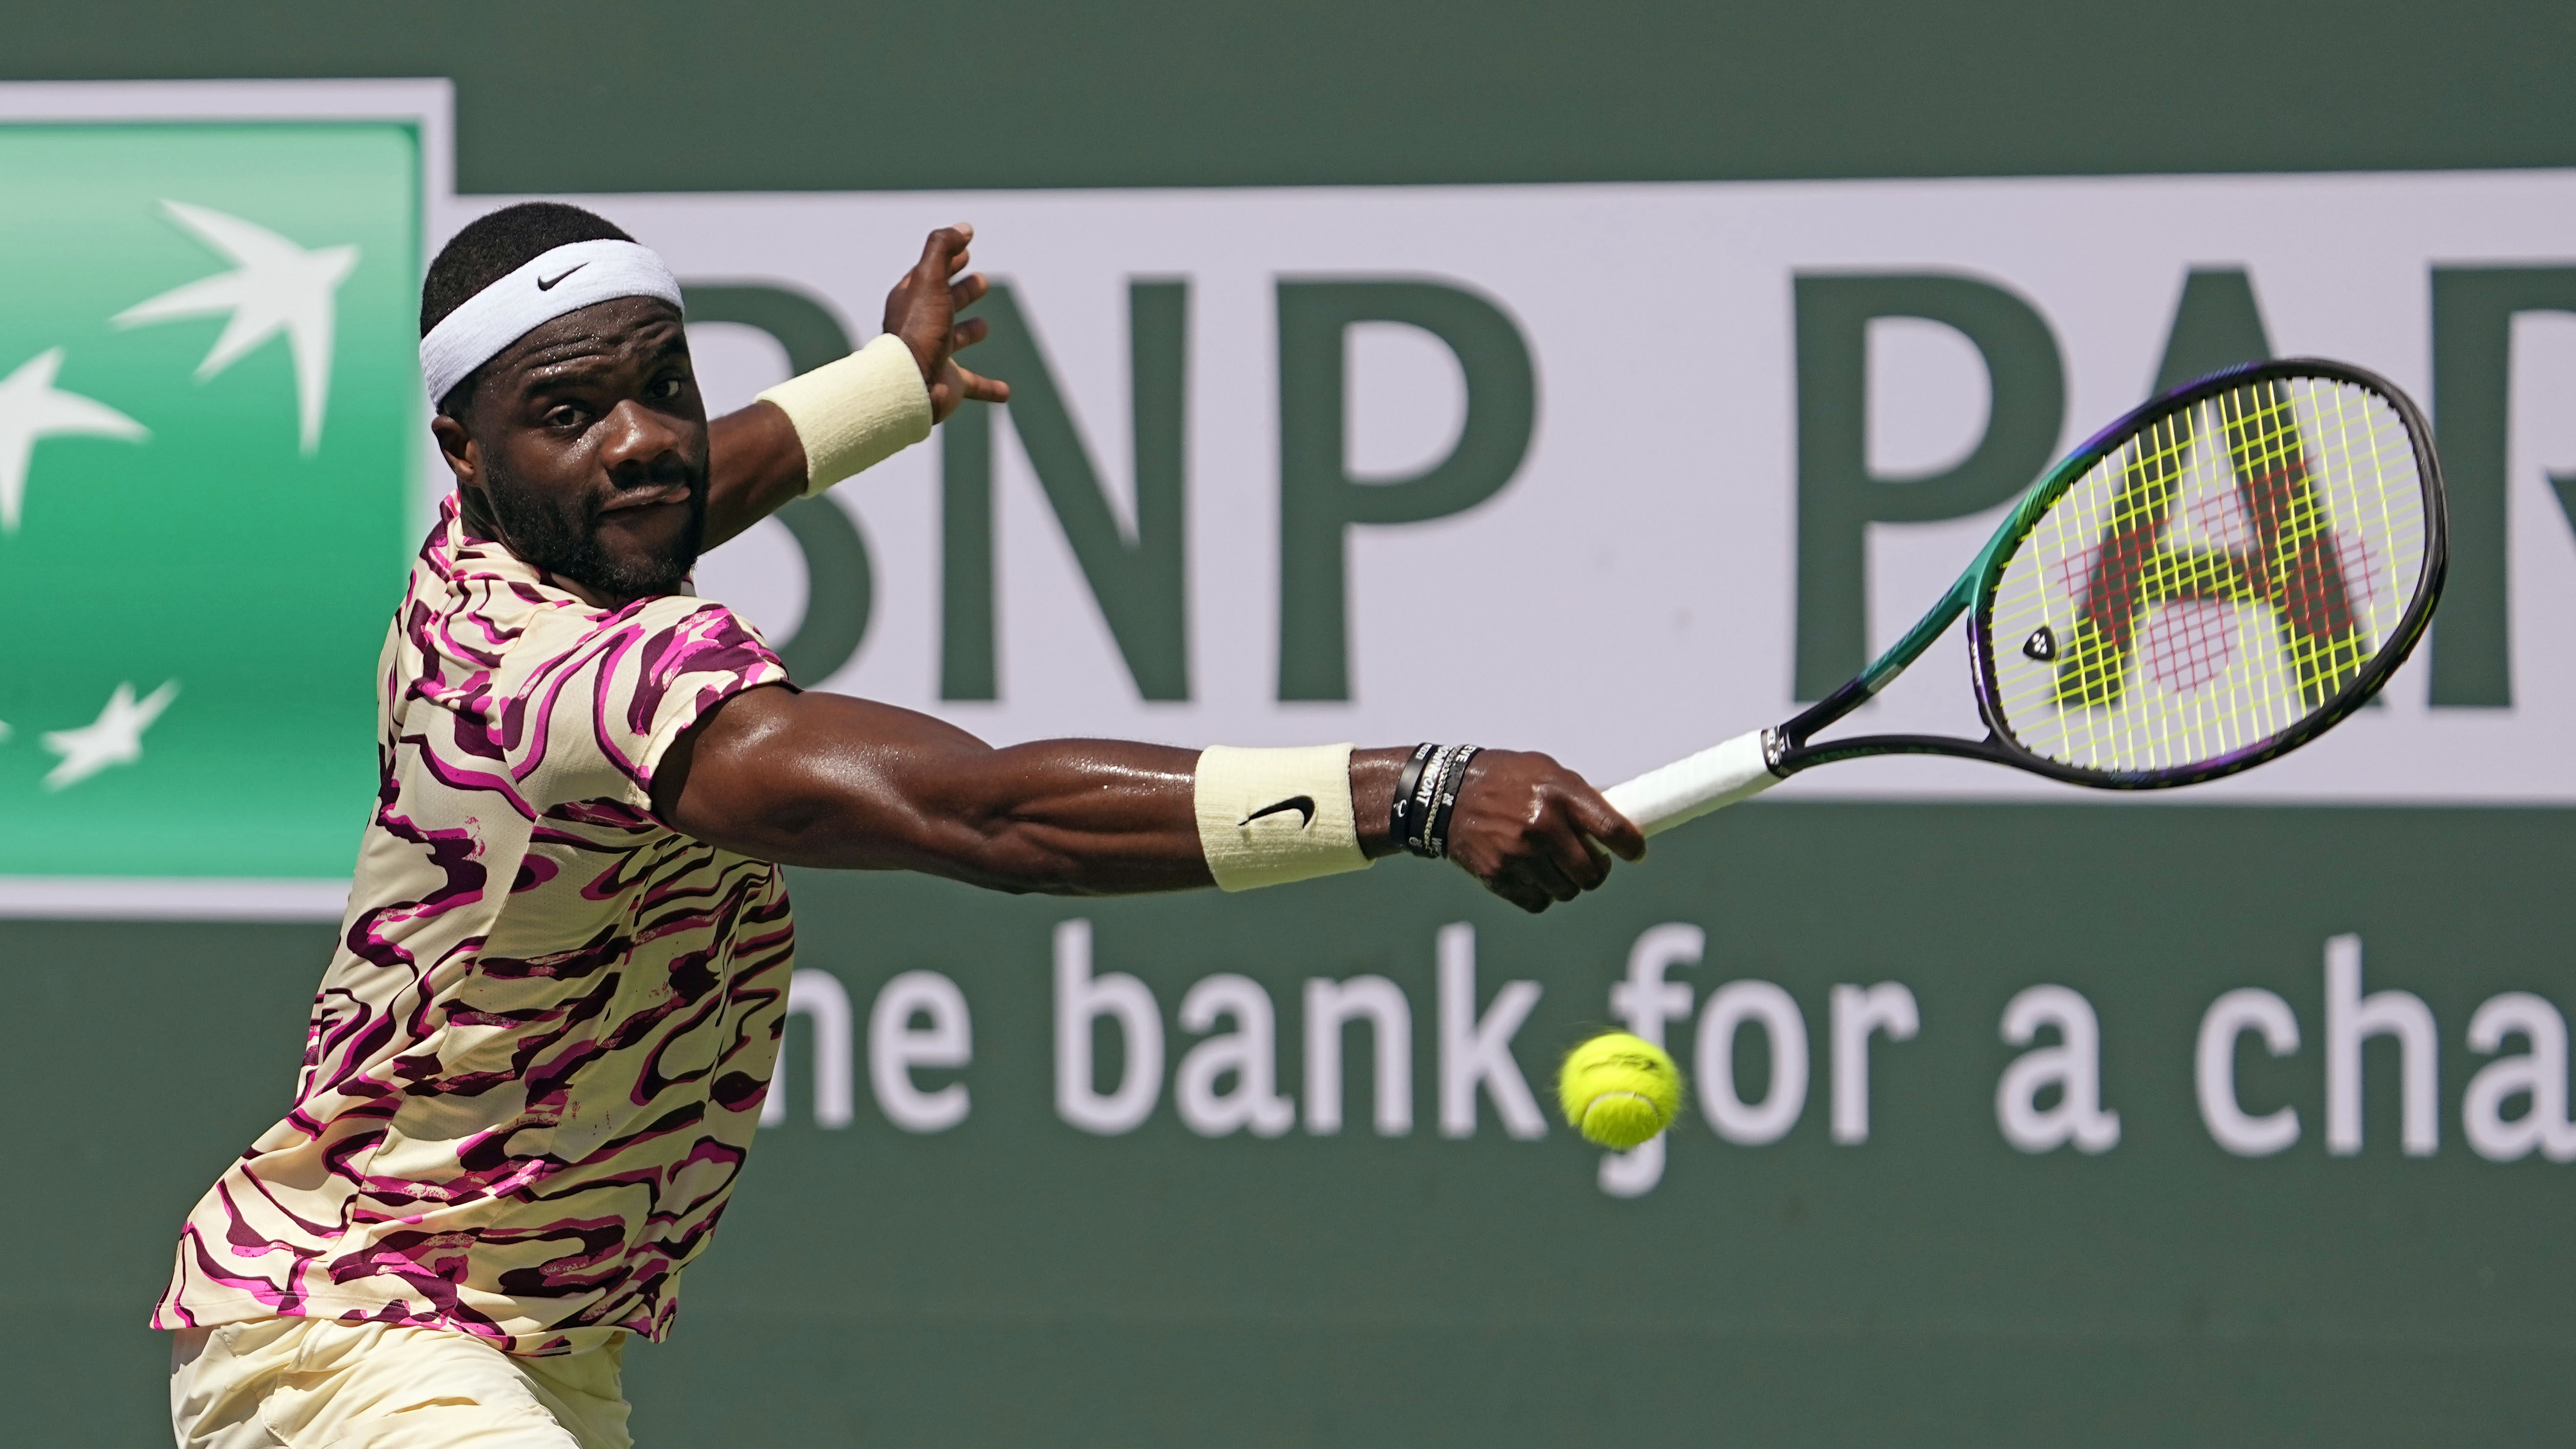 Frances Tiafoe upends Cameron Norrie, Coco Gauff out in Indian Wells quarterfinals